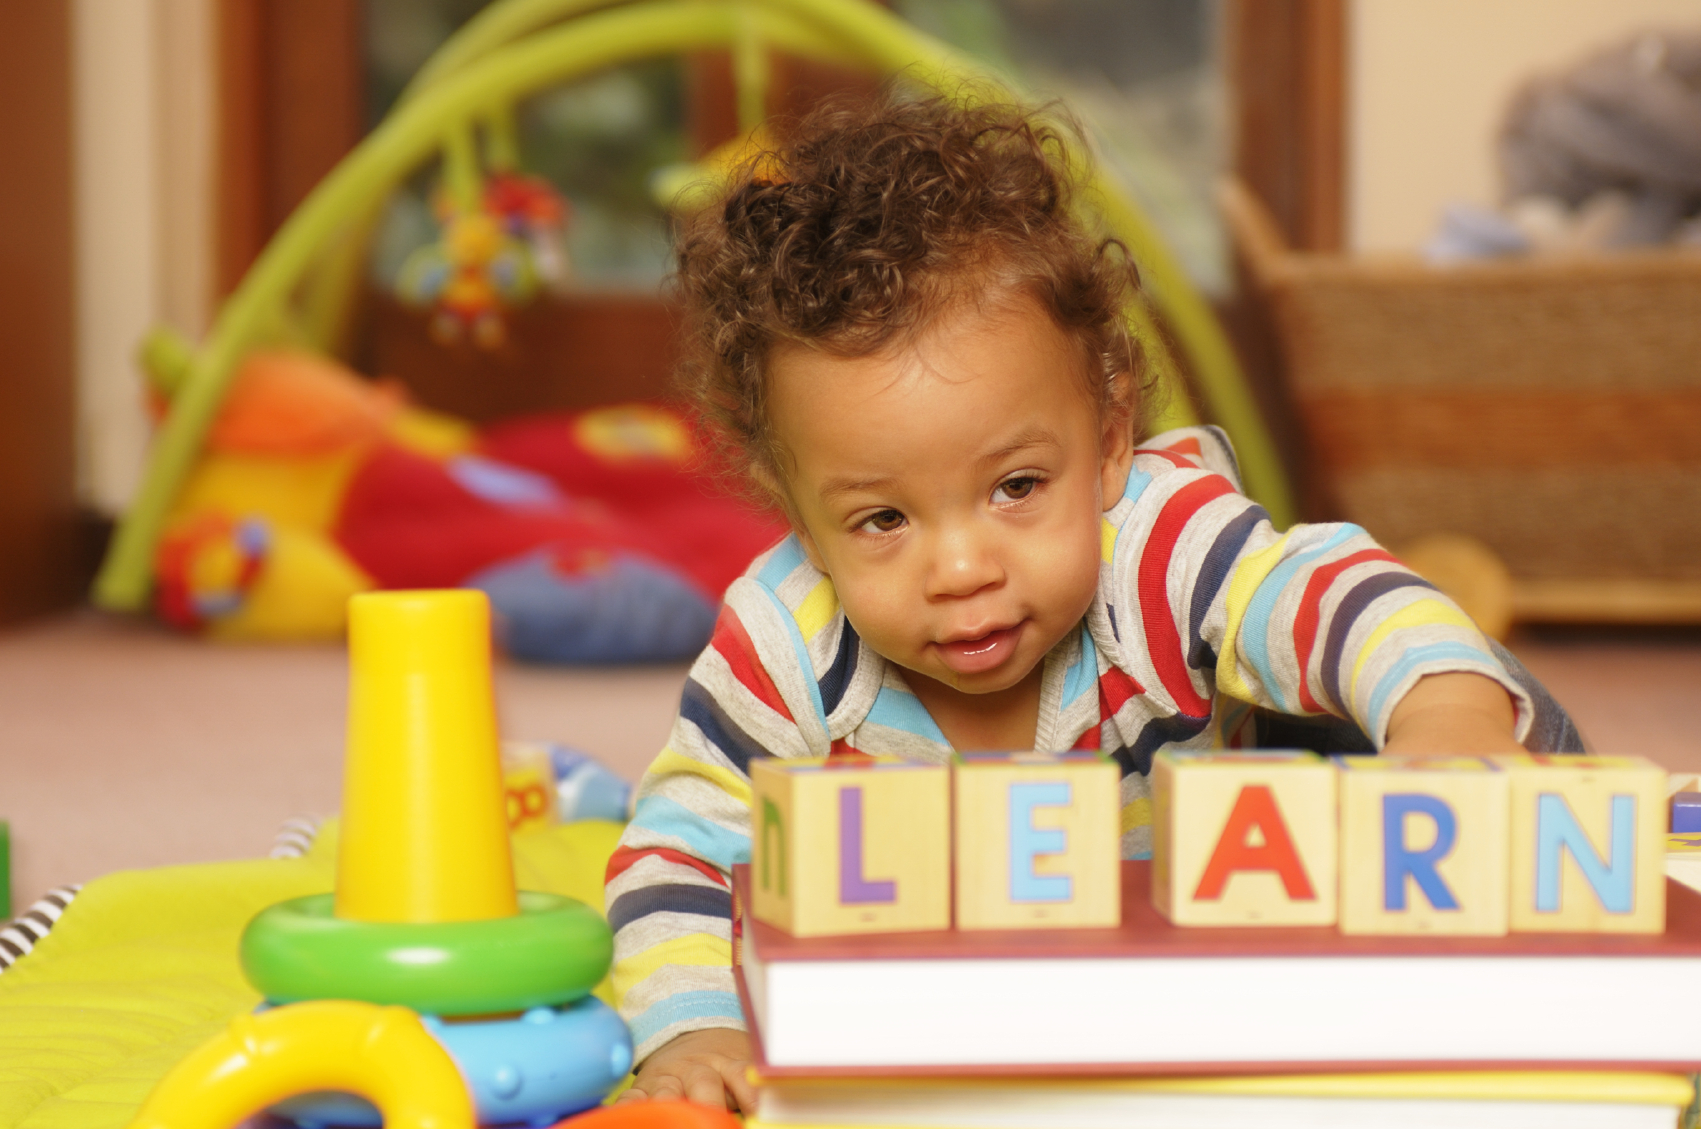 Principles of Child Development and Learning